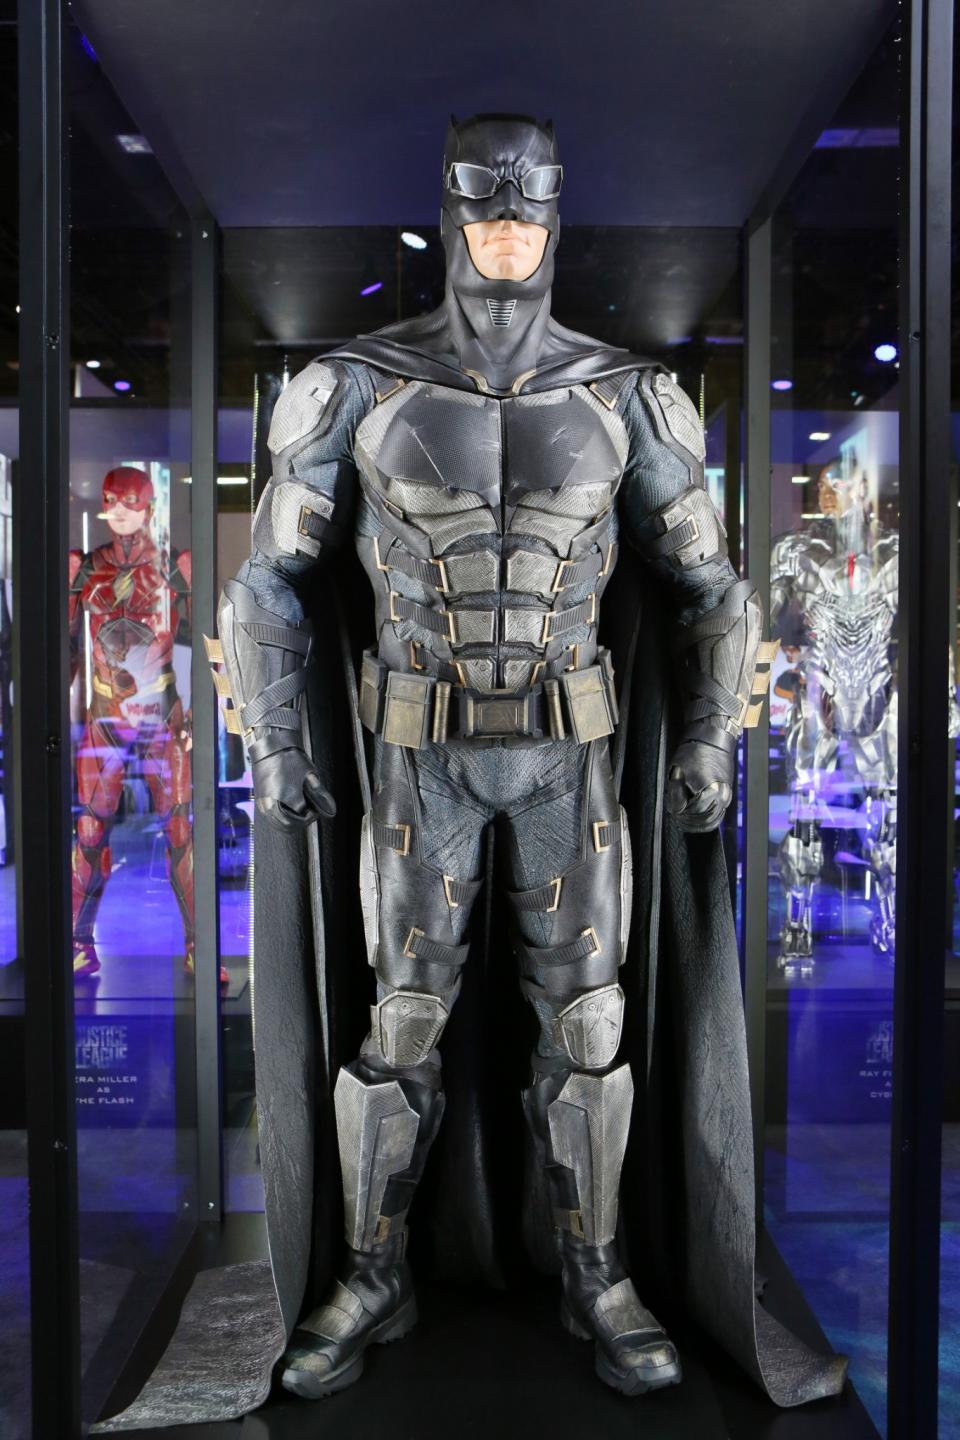 <p>Ben Affleck’s back as the Dark Knight in a retooled costume reminicent of the <i>Arkham</i> video games. Dig those Bat-goggles! (Credit: Warner Bros.) </p>